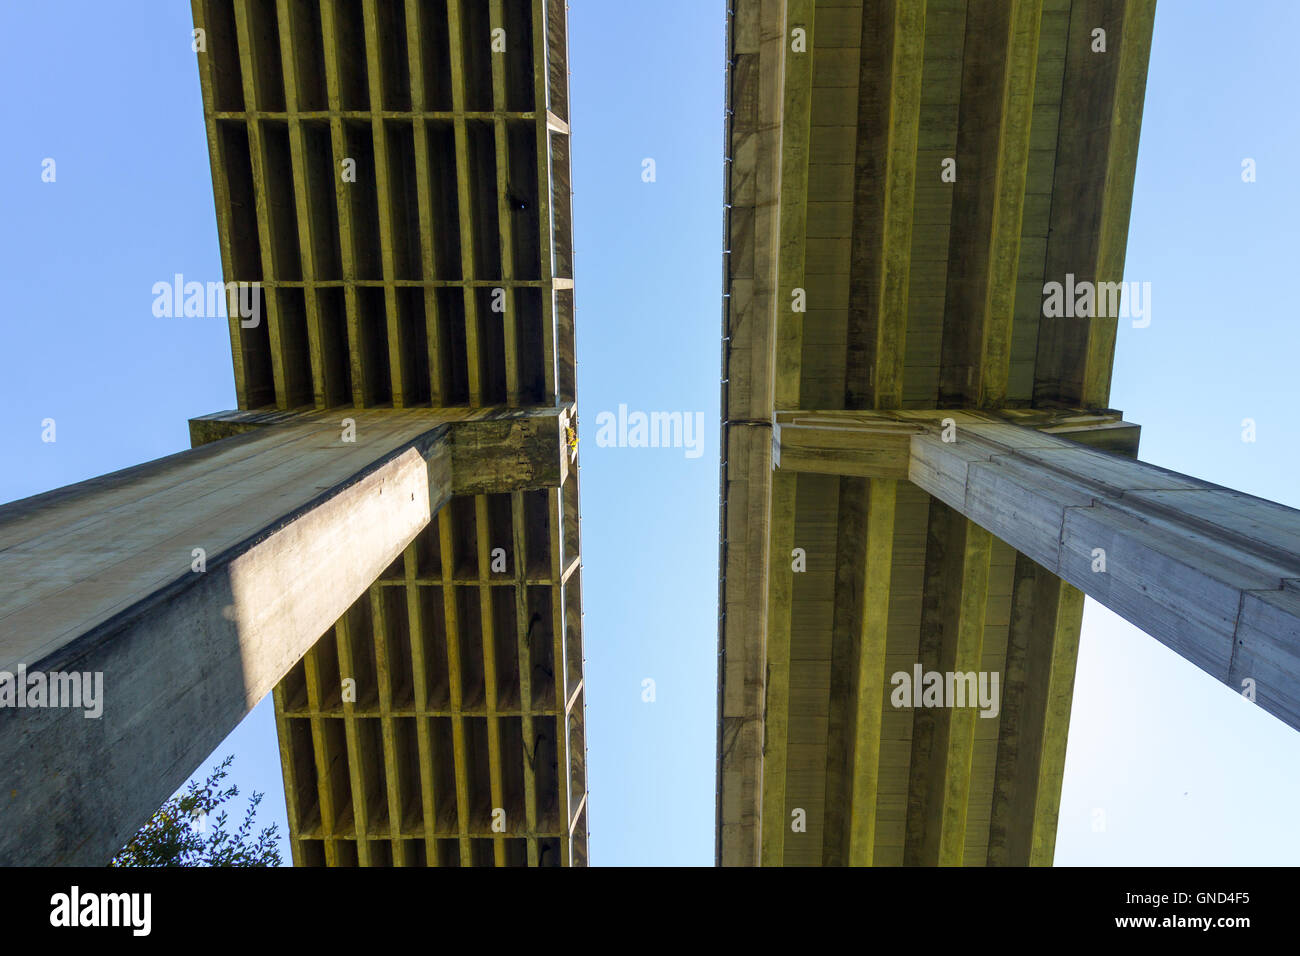 Double bridge wooden supports high Stock Photo